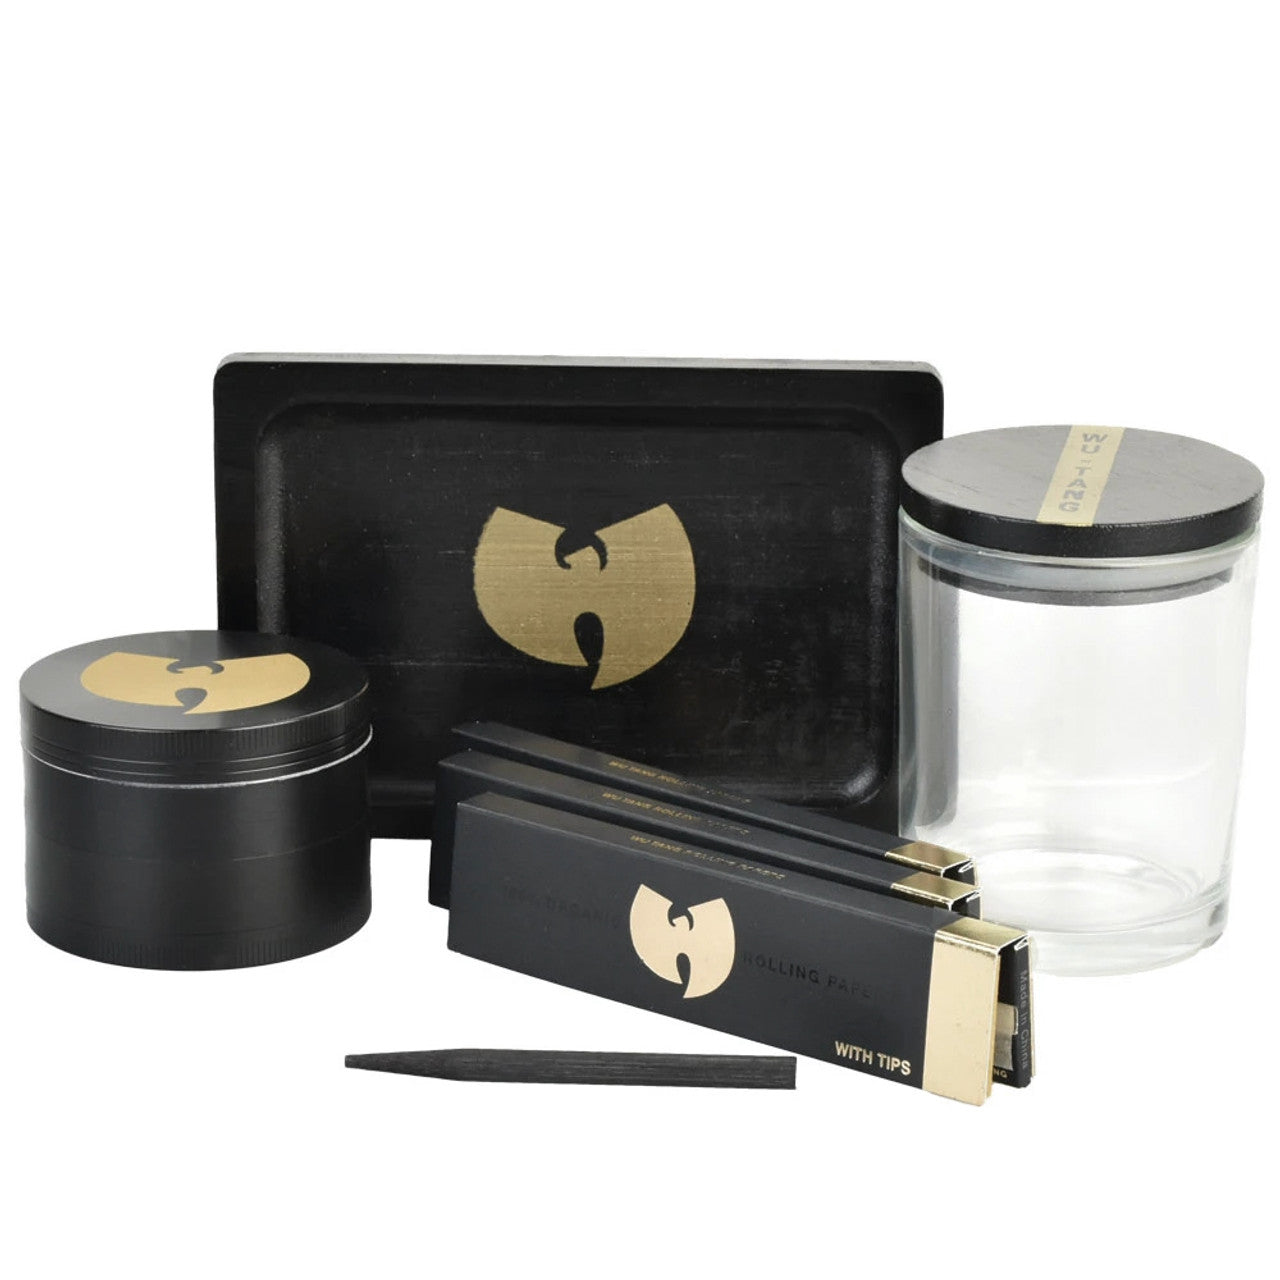 Wu-Tang Deluxe Smokers Kit (W/ Jar, Pollinator, Tray & Papers) (Special Order)